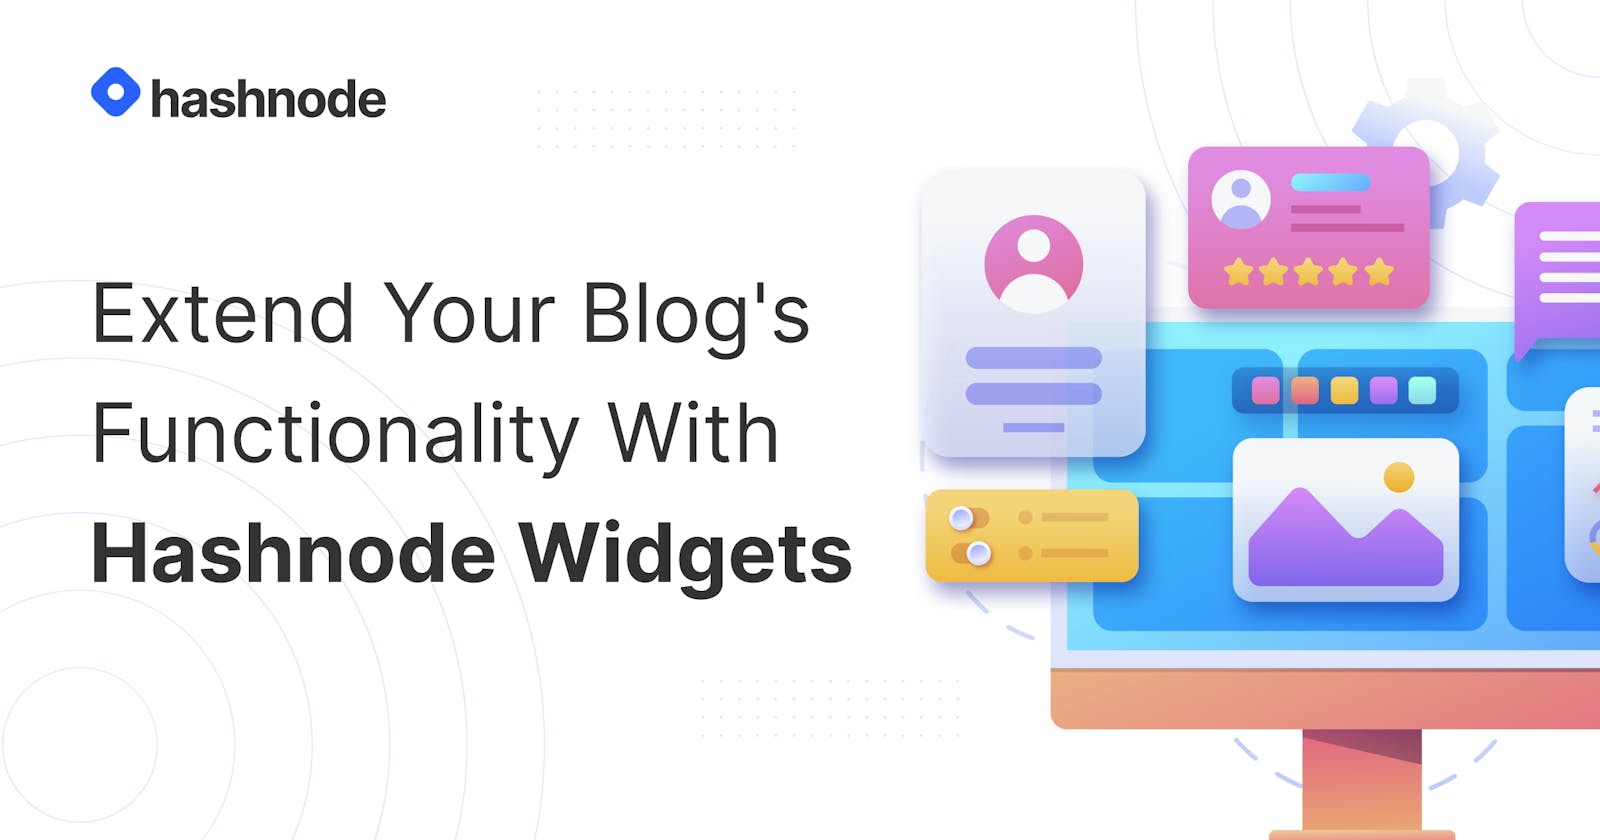 Extend Your Blog's Functionality With Hashnode Widgets